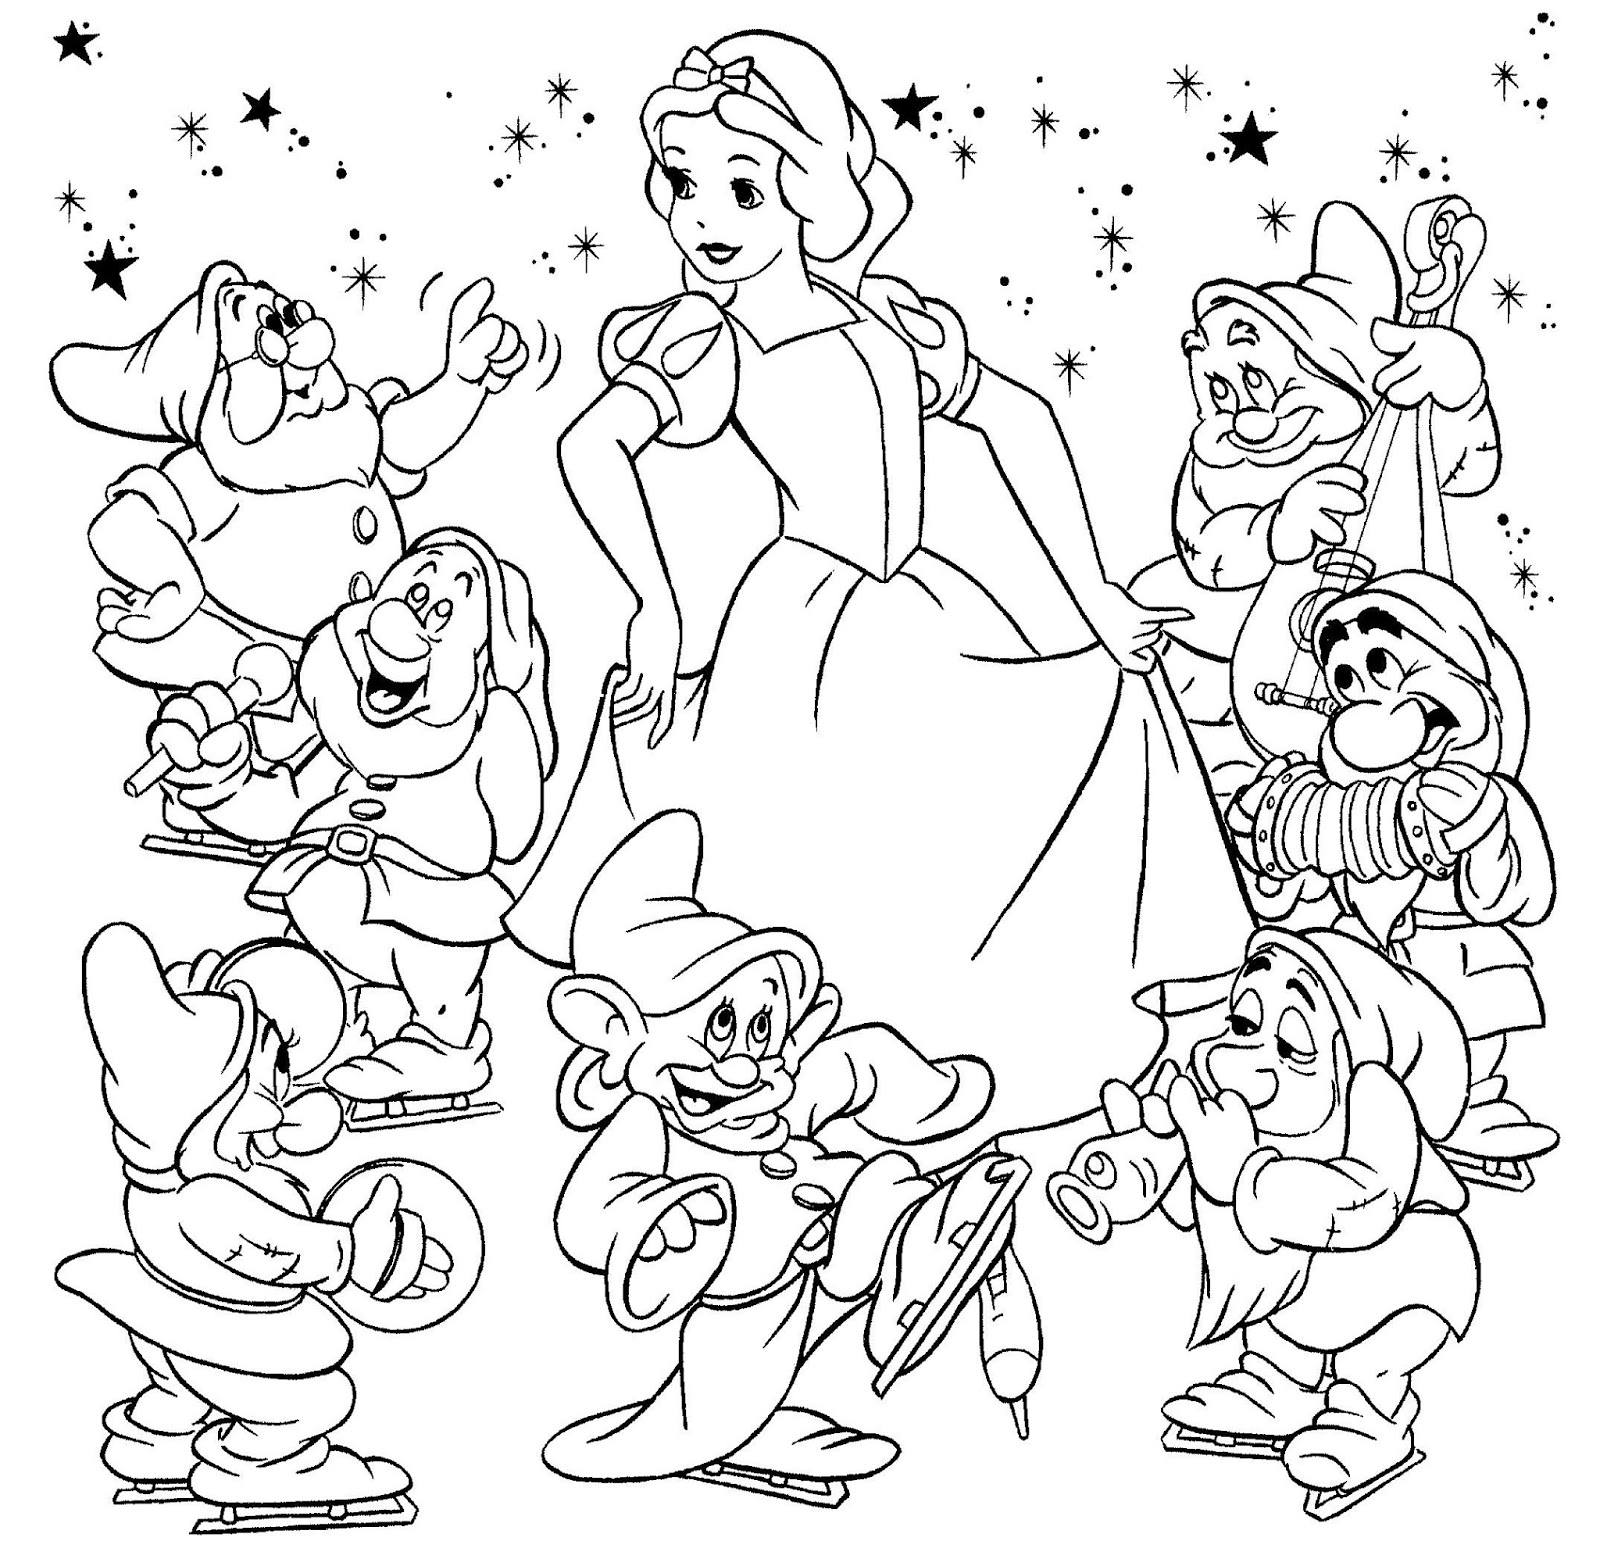 Snow White Coloring Pages From Brooklyn Free Printables